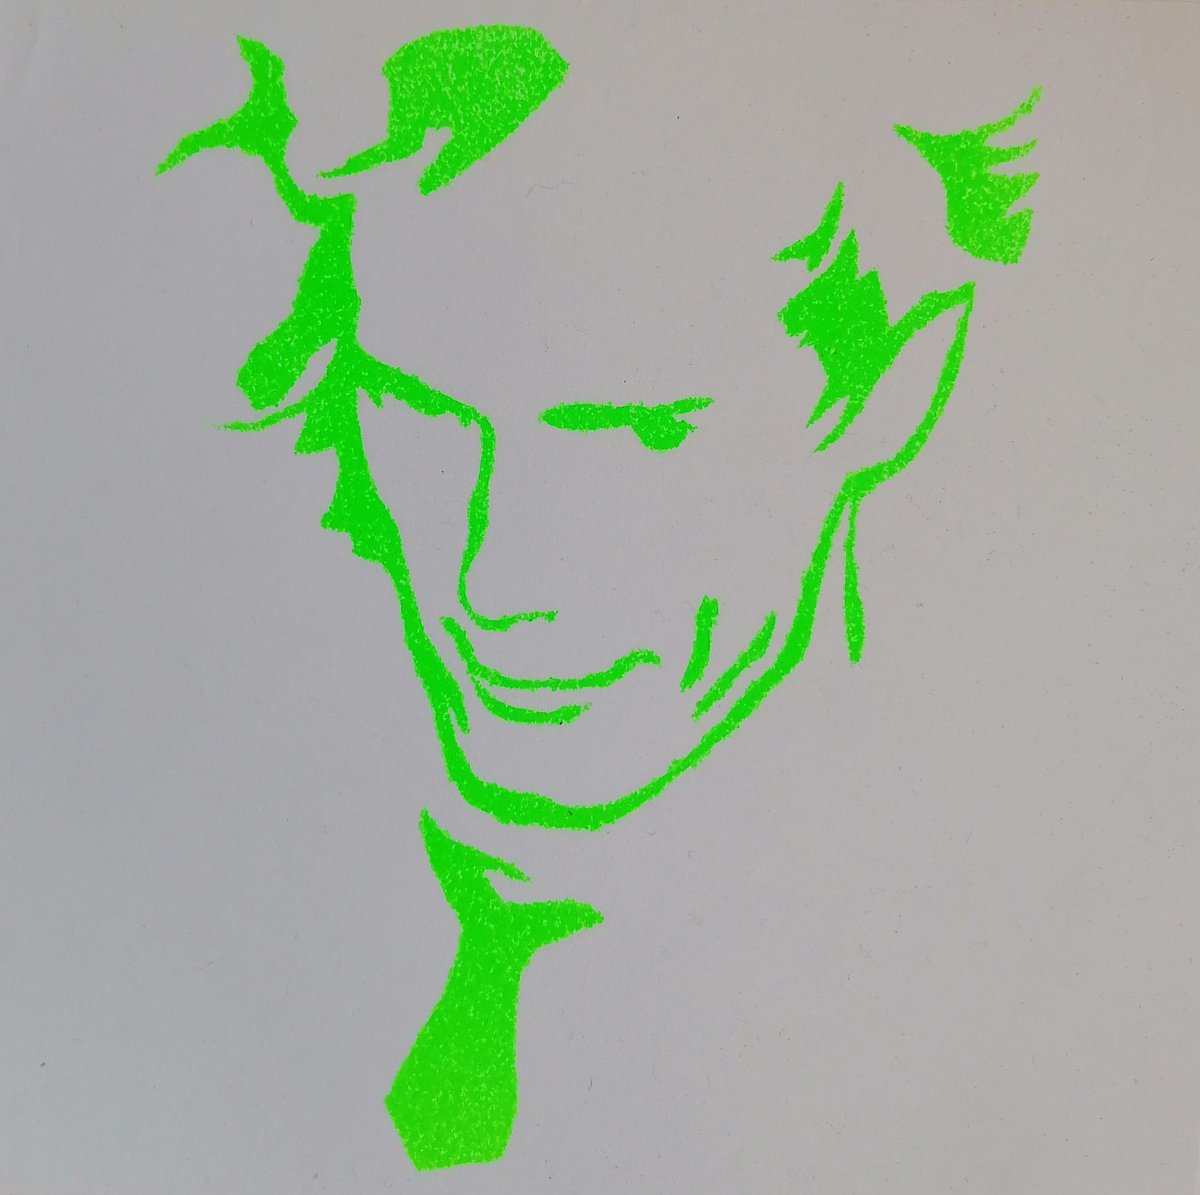 Another Johnny Rotten graffiti art stencil I made, this time with fluorescent lime green spray paint. I quite like the result. #graffiti #graffitiart #graffitiartwork #graffitiartist #stencil #stencilart #spraypaint #spraypaintart #spraypainting #punk #punkrock #marvel #comic